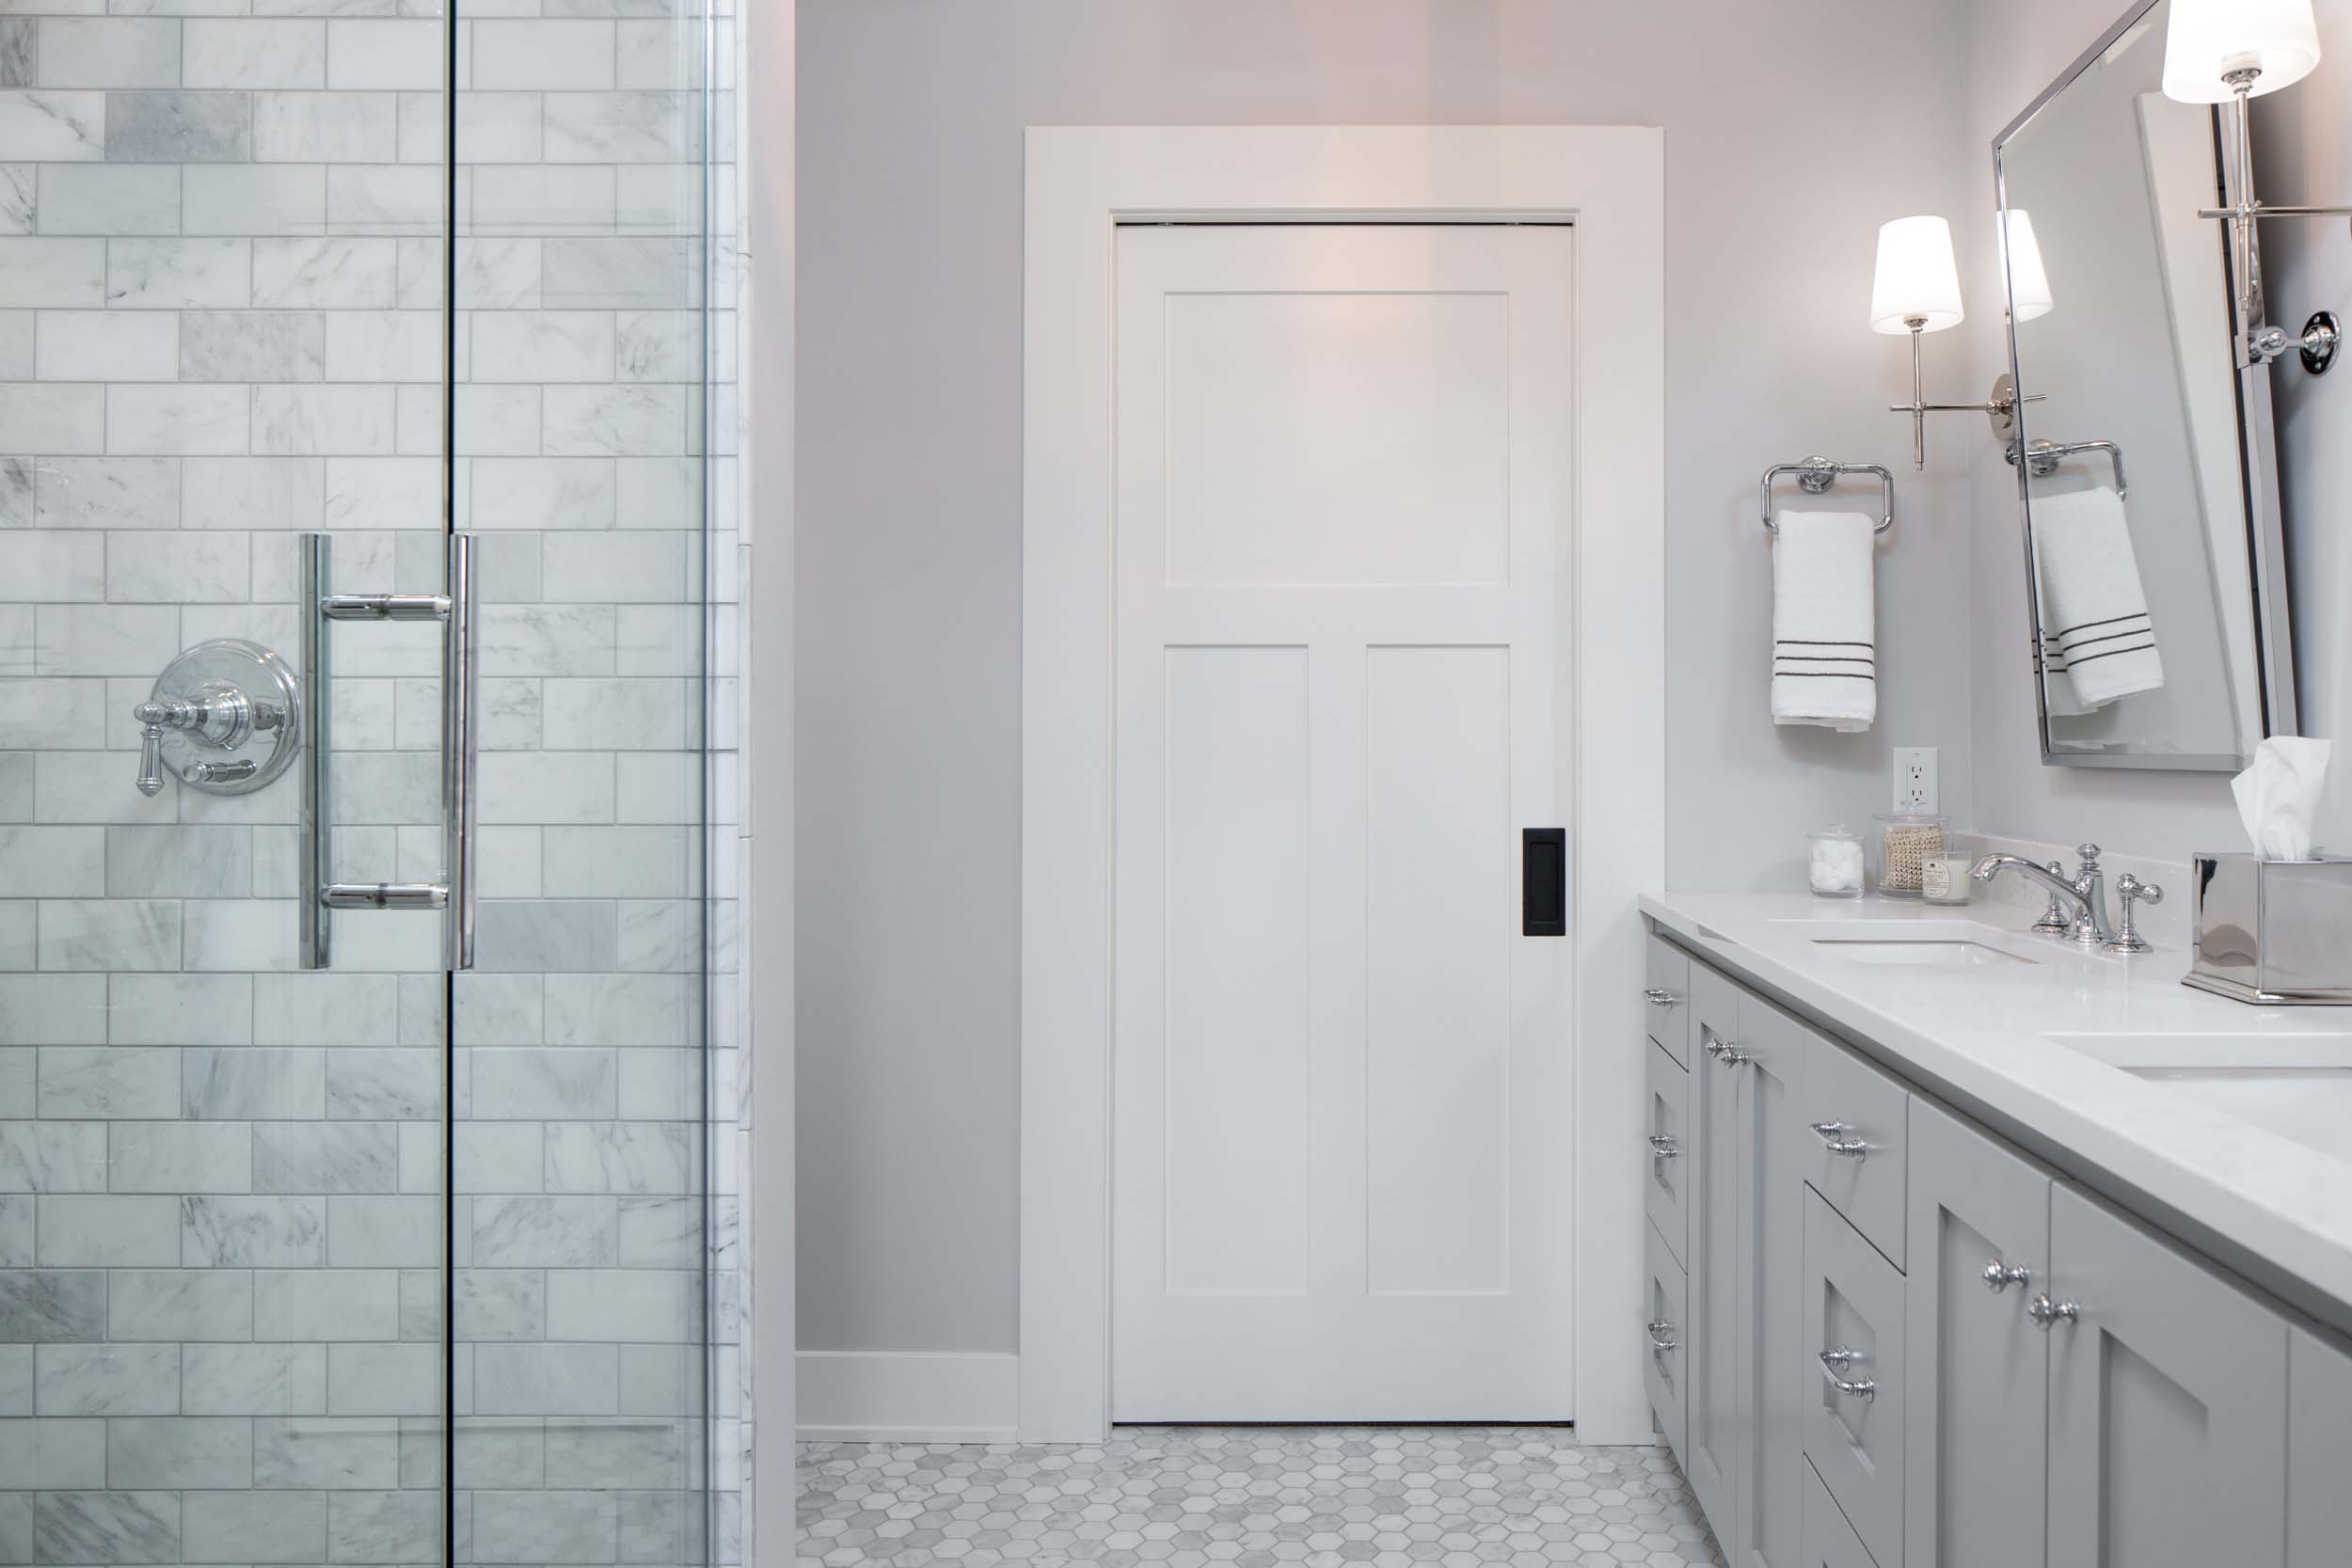 A white and gray bathroom with a glass shower door.